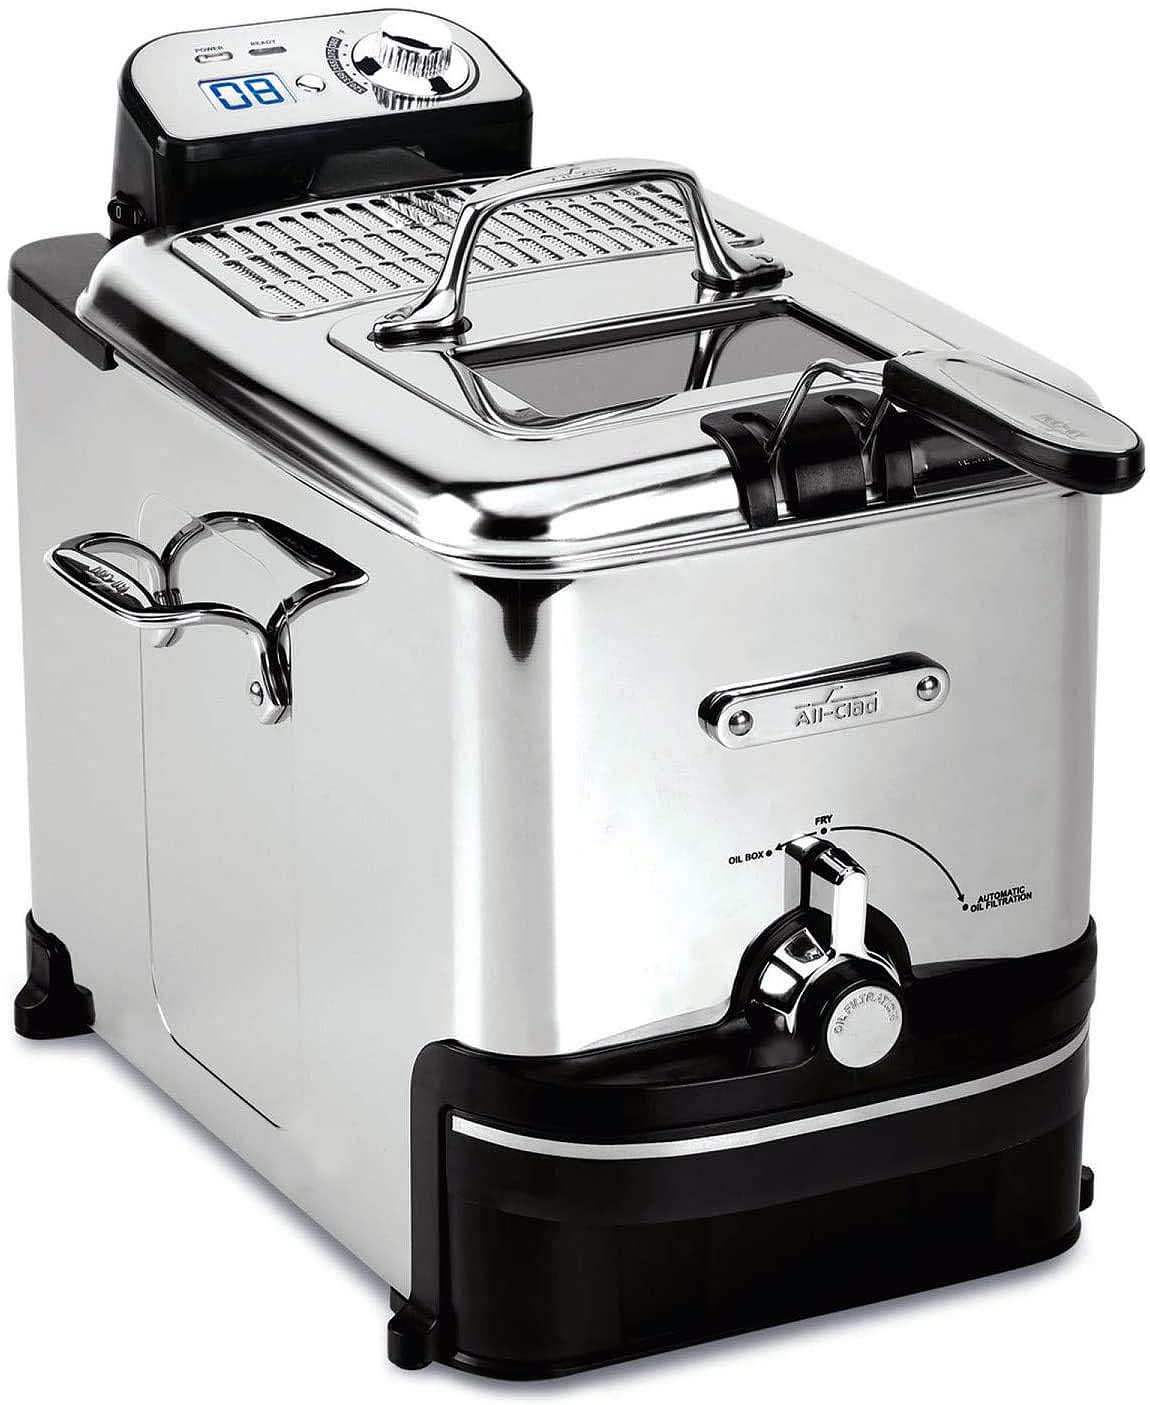 Top of the line stainless steel deep fryer with tons of features. steel deep frying pan